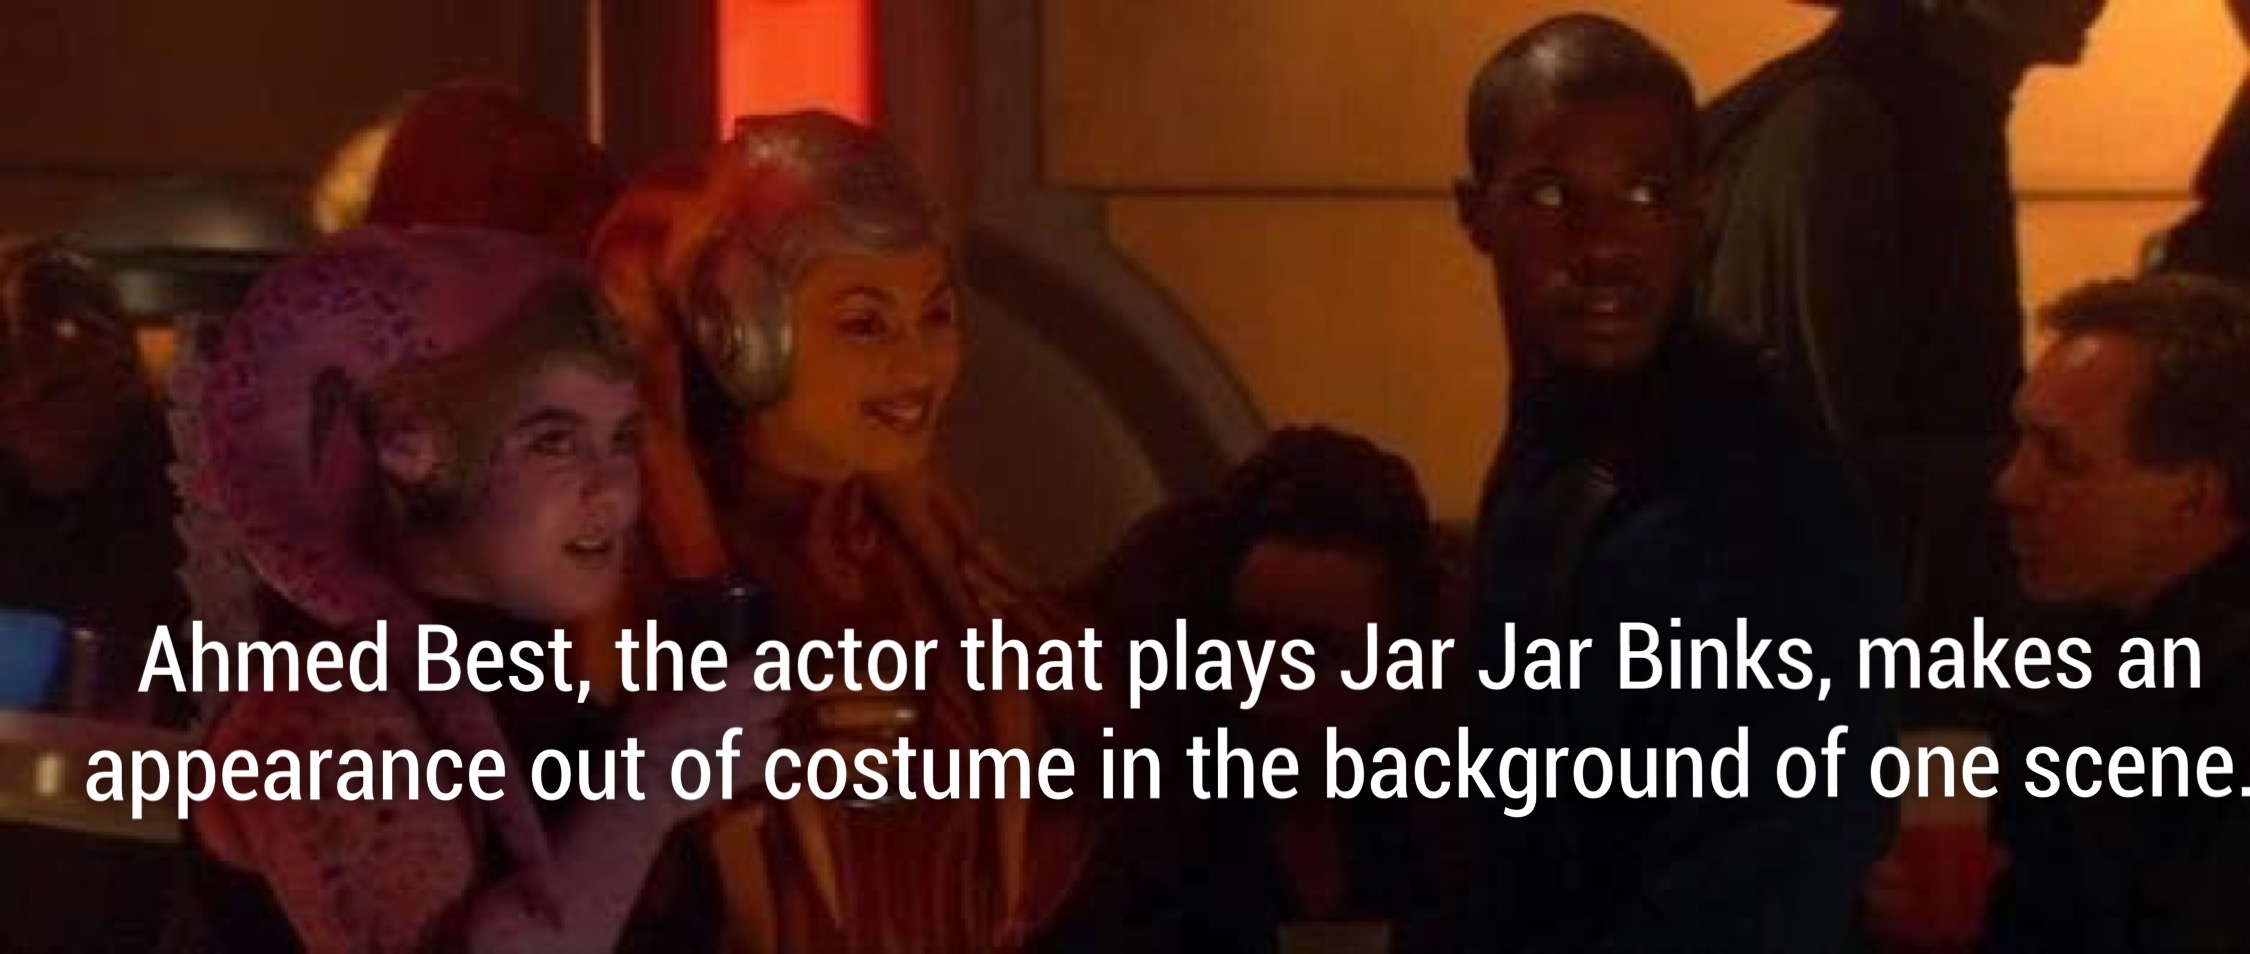 photo caption - Ahmed Best, the actor that plays Jar Jar Binks, makes an appearance out of costume in the background of one scene,